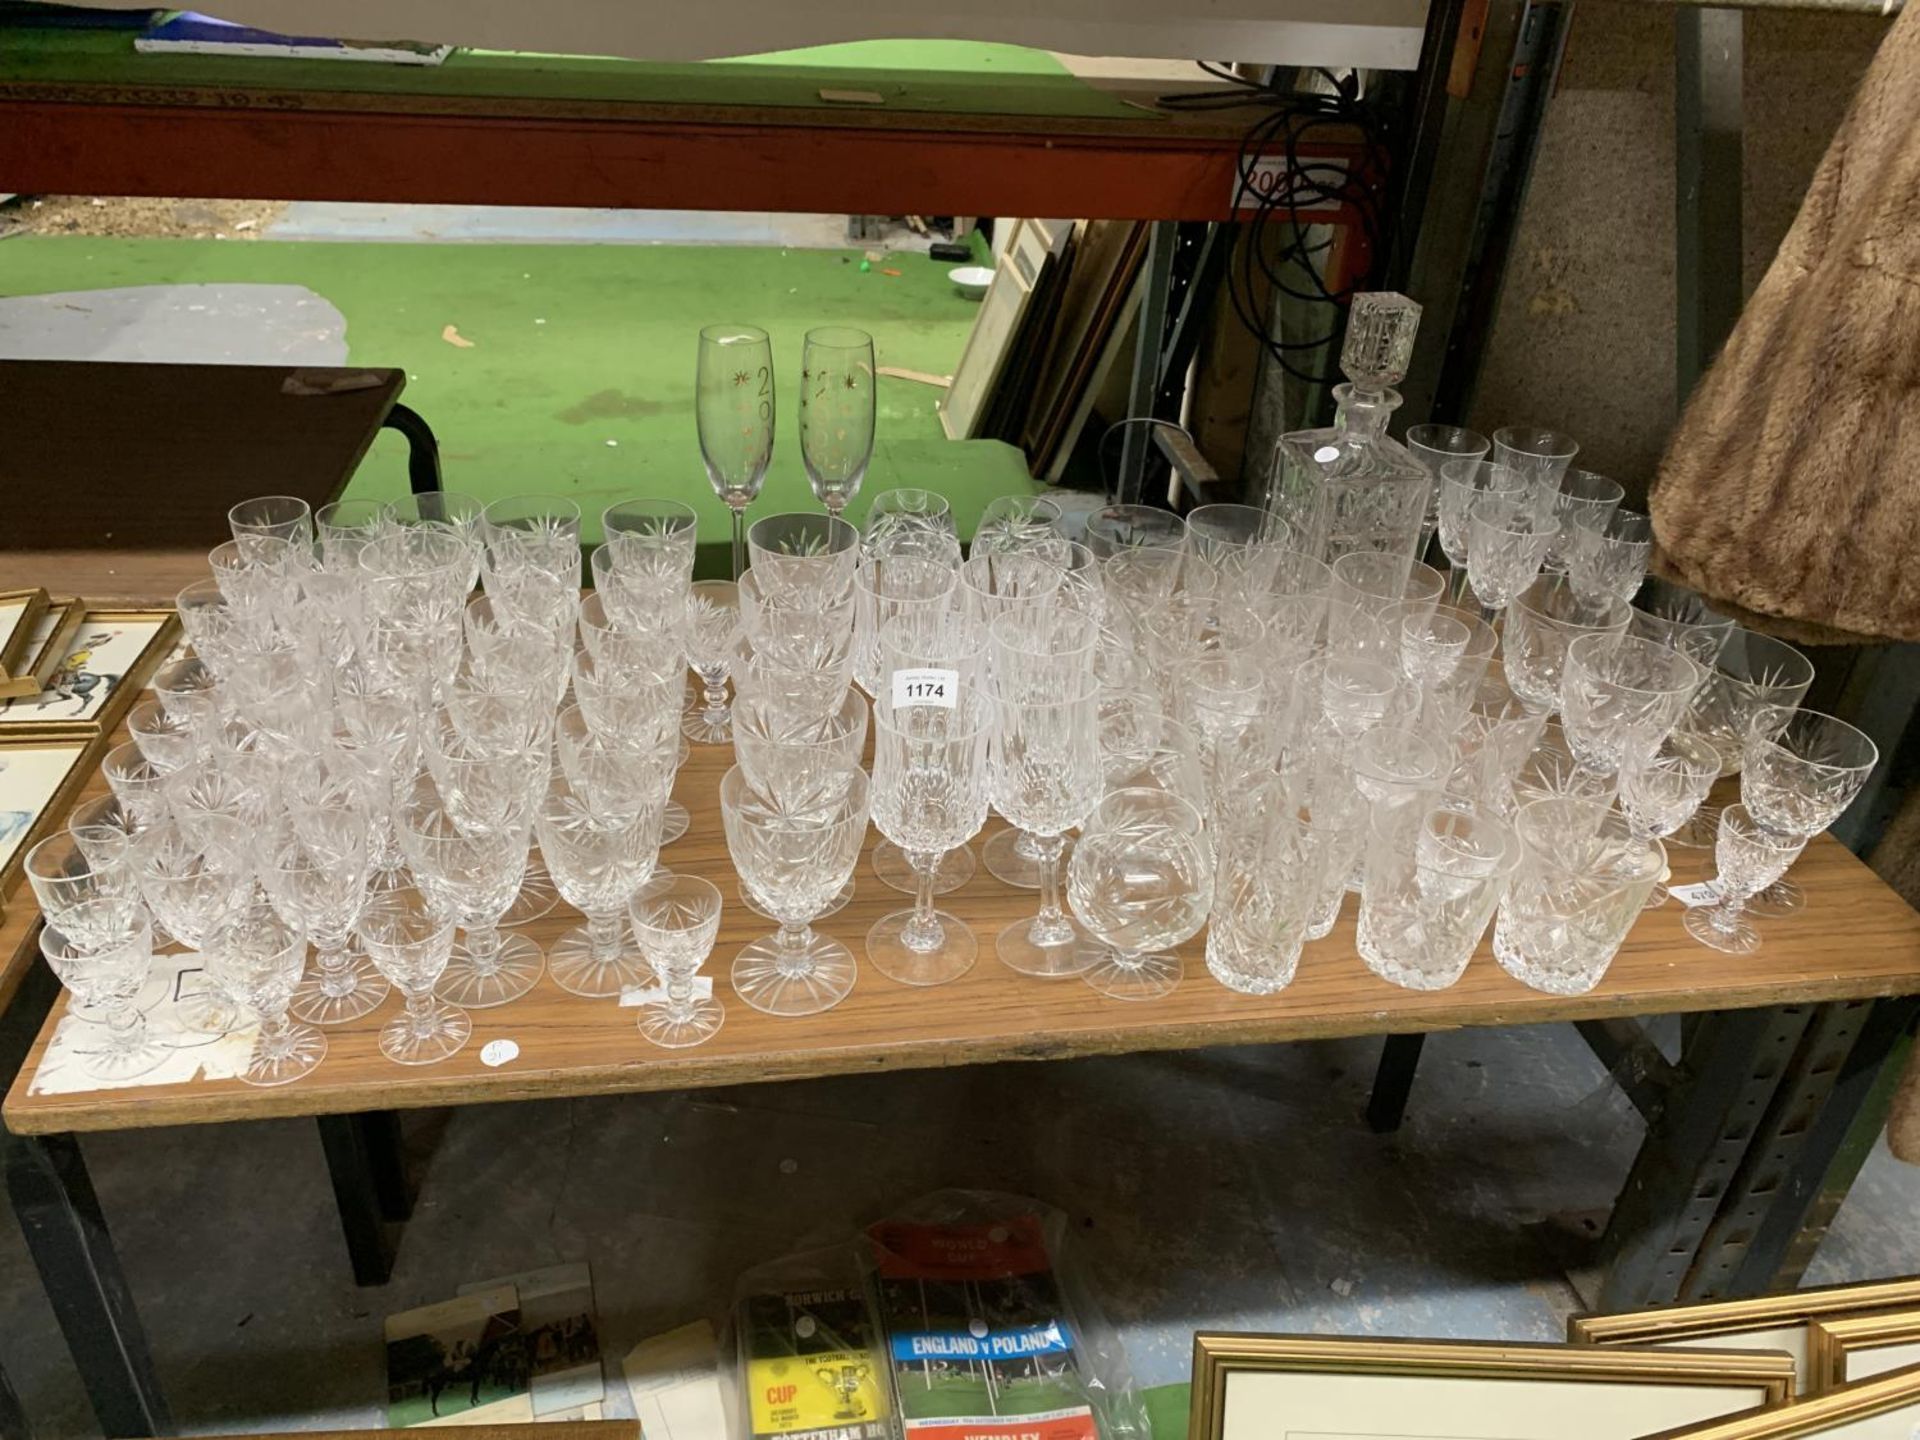 A LARGE QUANTITY OF GLASSES TO INCLUDE WINE, CHAMPAGNE FLUTES, SHERRY, BRANDY, TUMBLERS, ETC PLUS